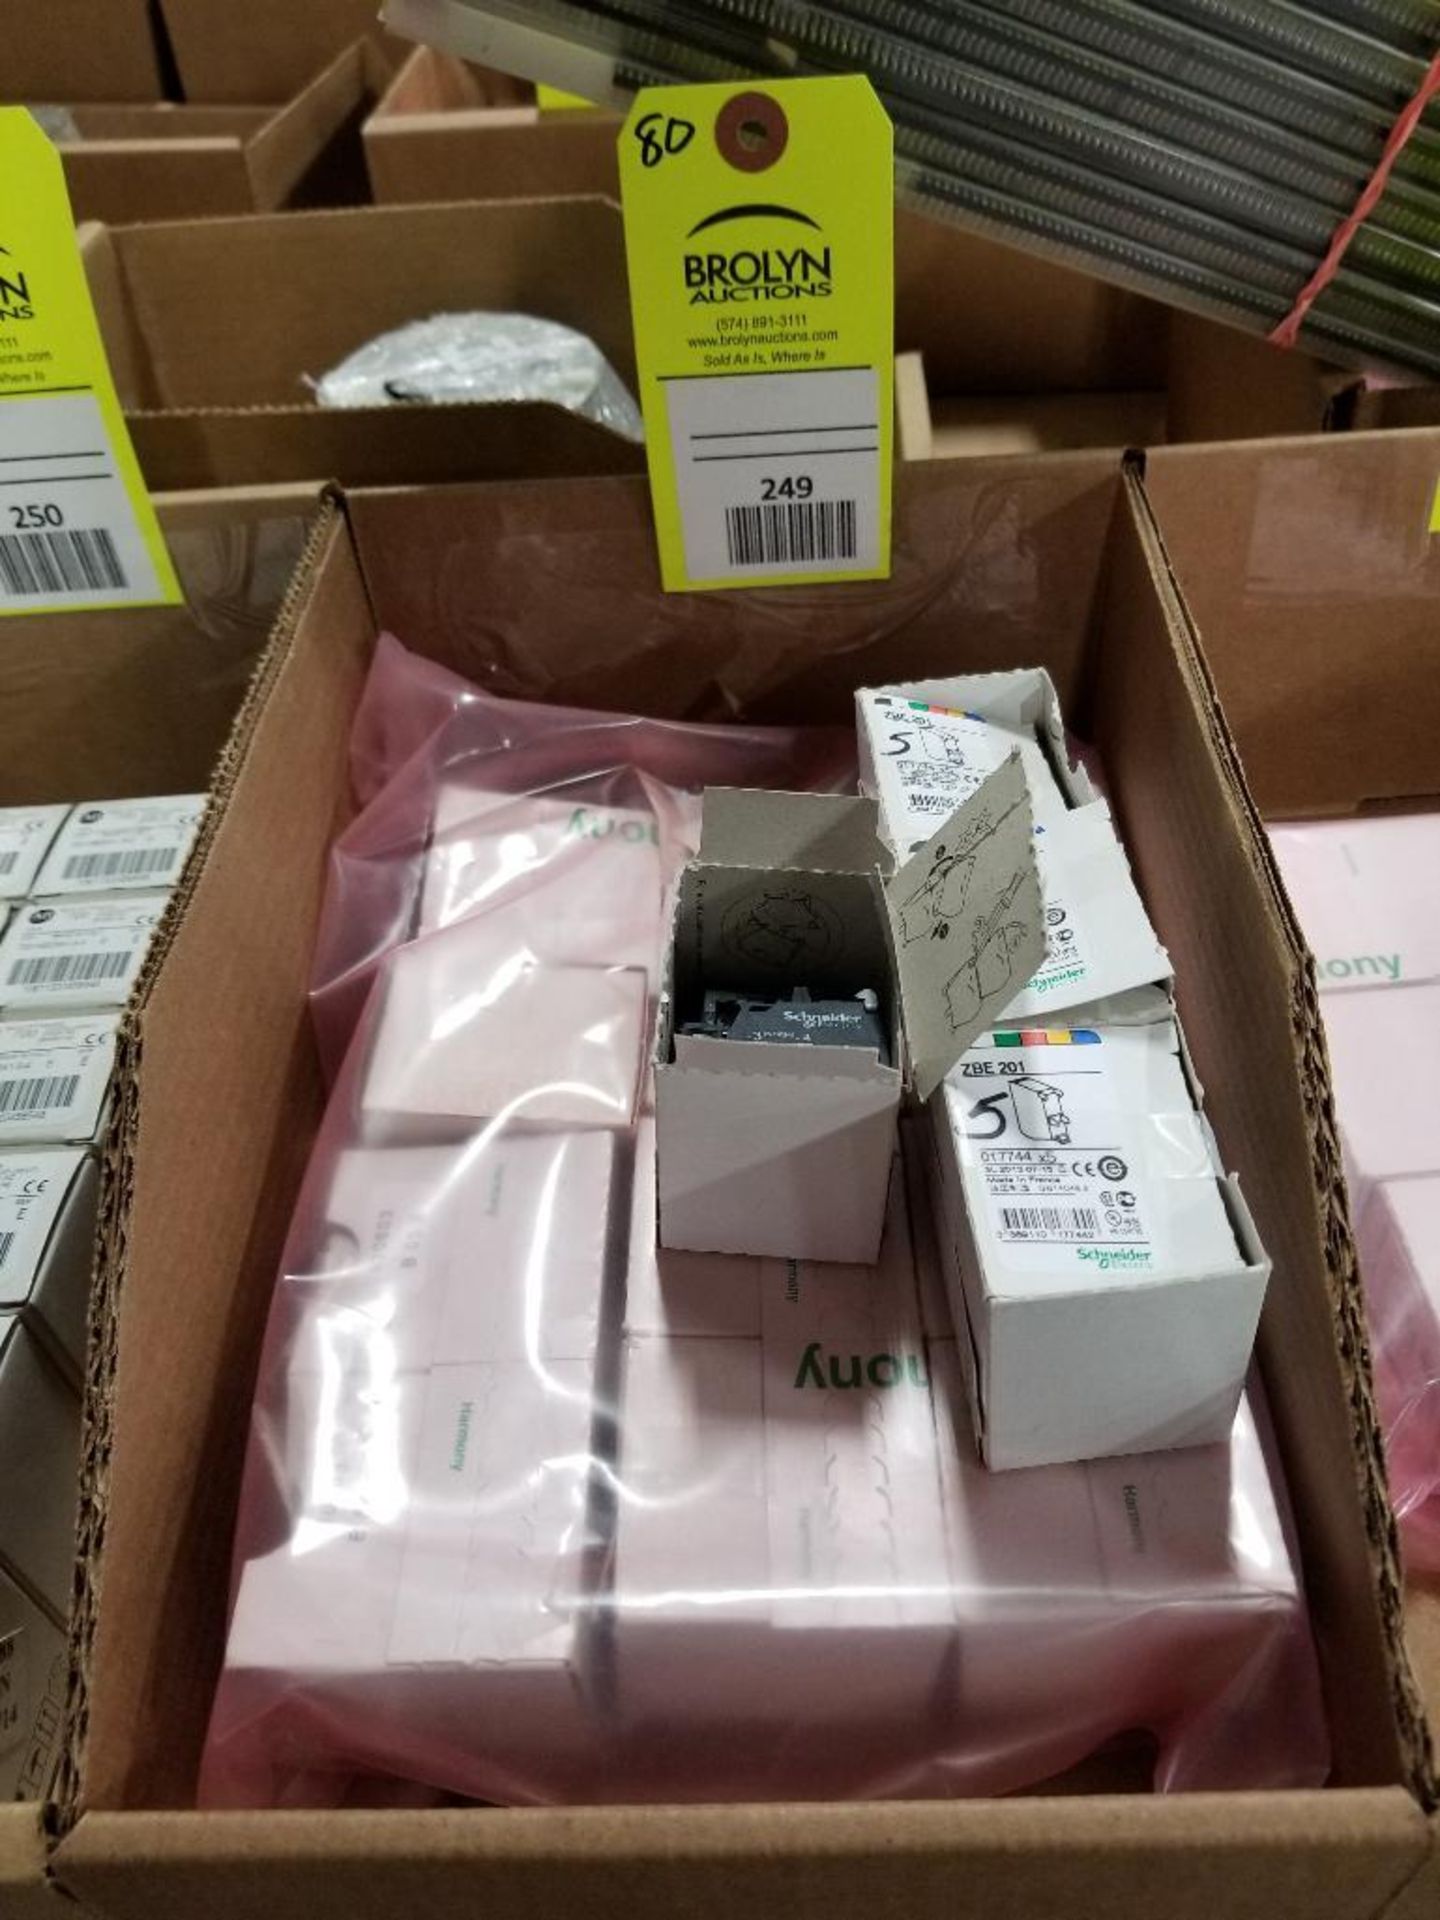 Qty 80 - Schneider electric. Part number 017744. New in bulk box.